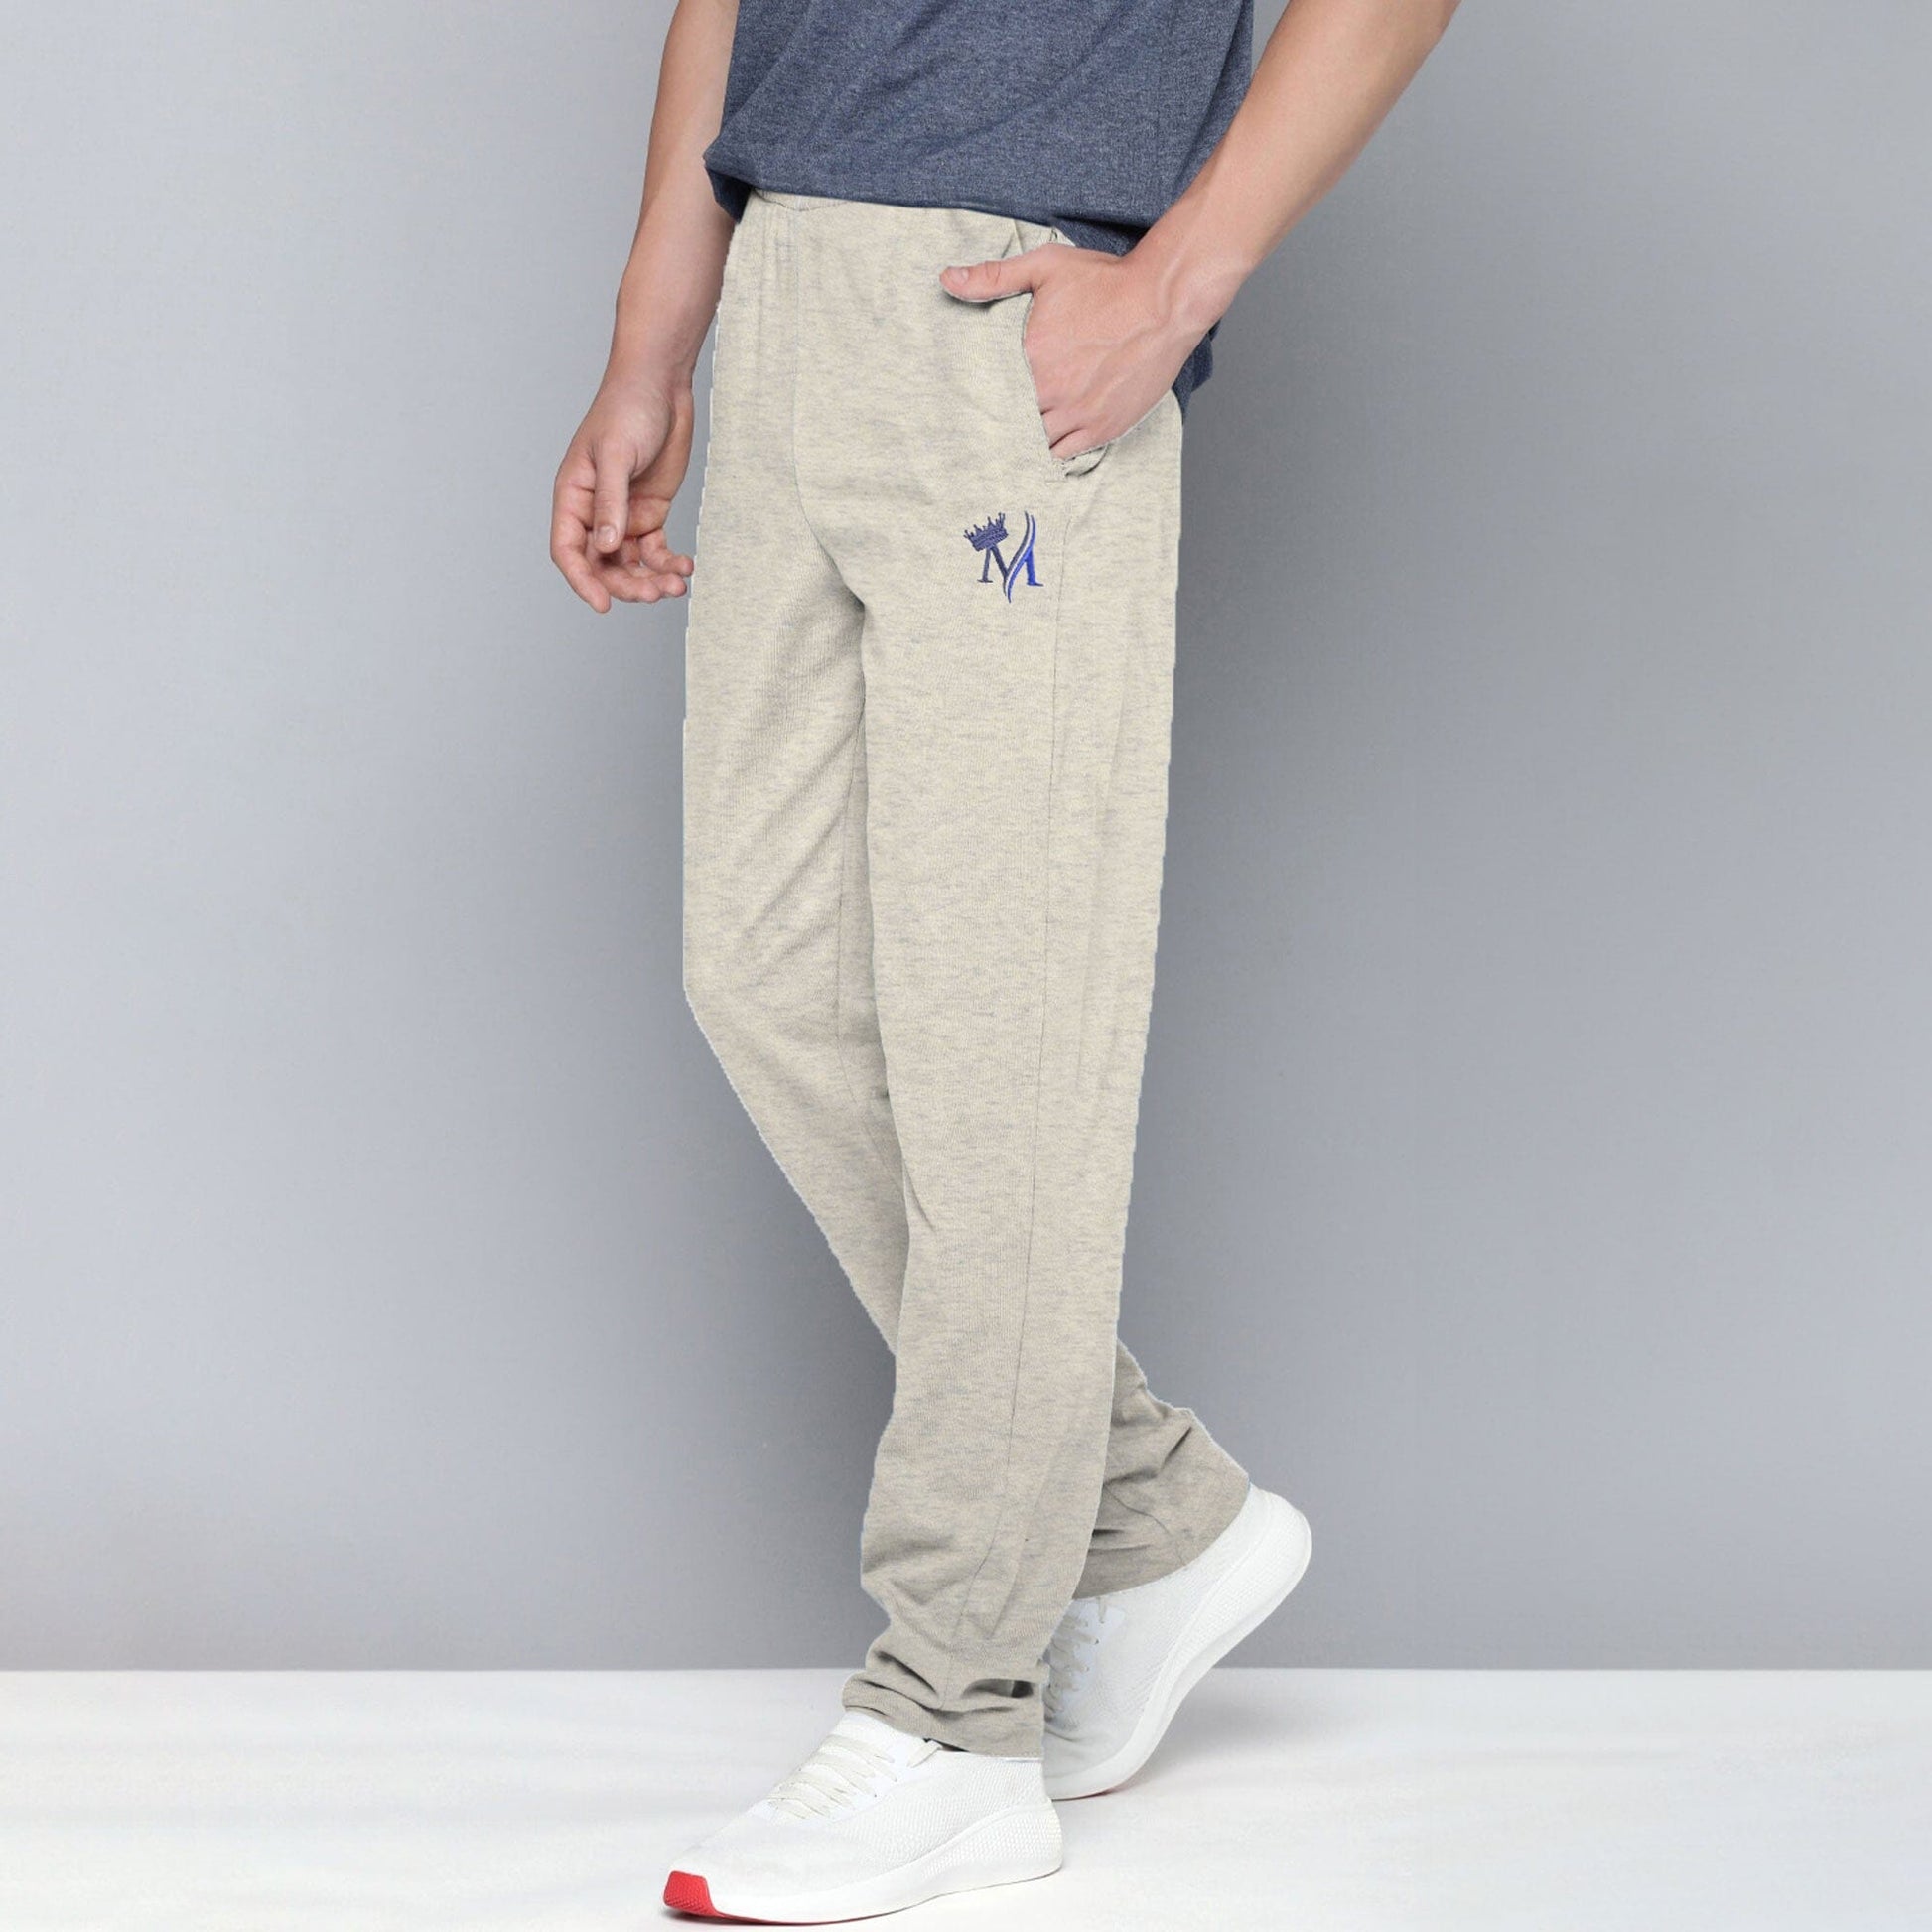 MAX 21 Men's Crown Embroidered Fleece Trousers Men's Trousers SZK Oatmeal S 